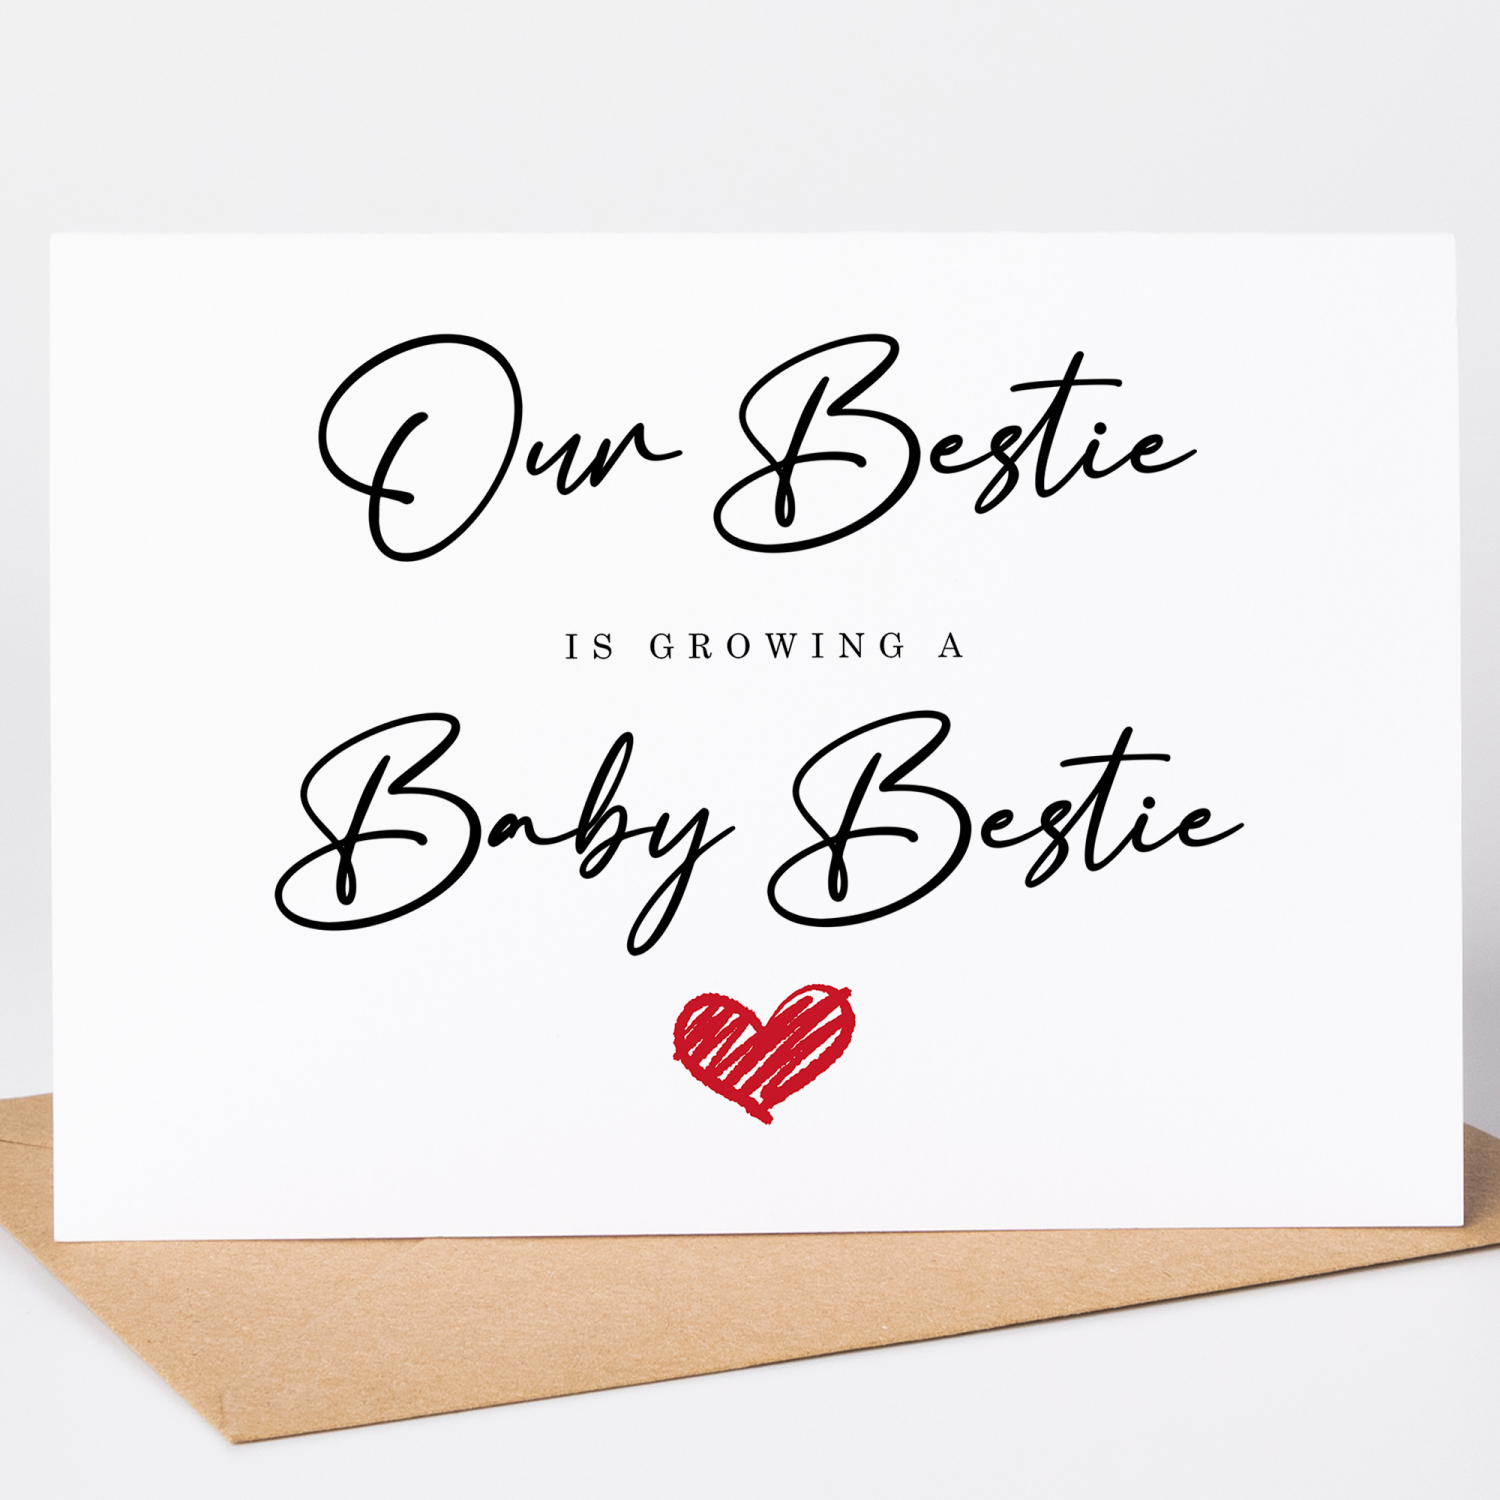 Our Bestie Is Growing a Baby Bestie Card, New Baby Card - A6 - 4.1" x 5.8"